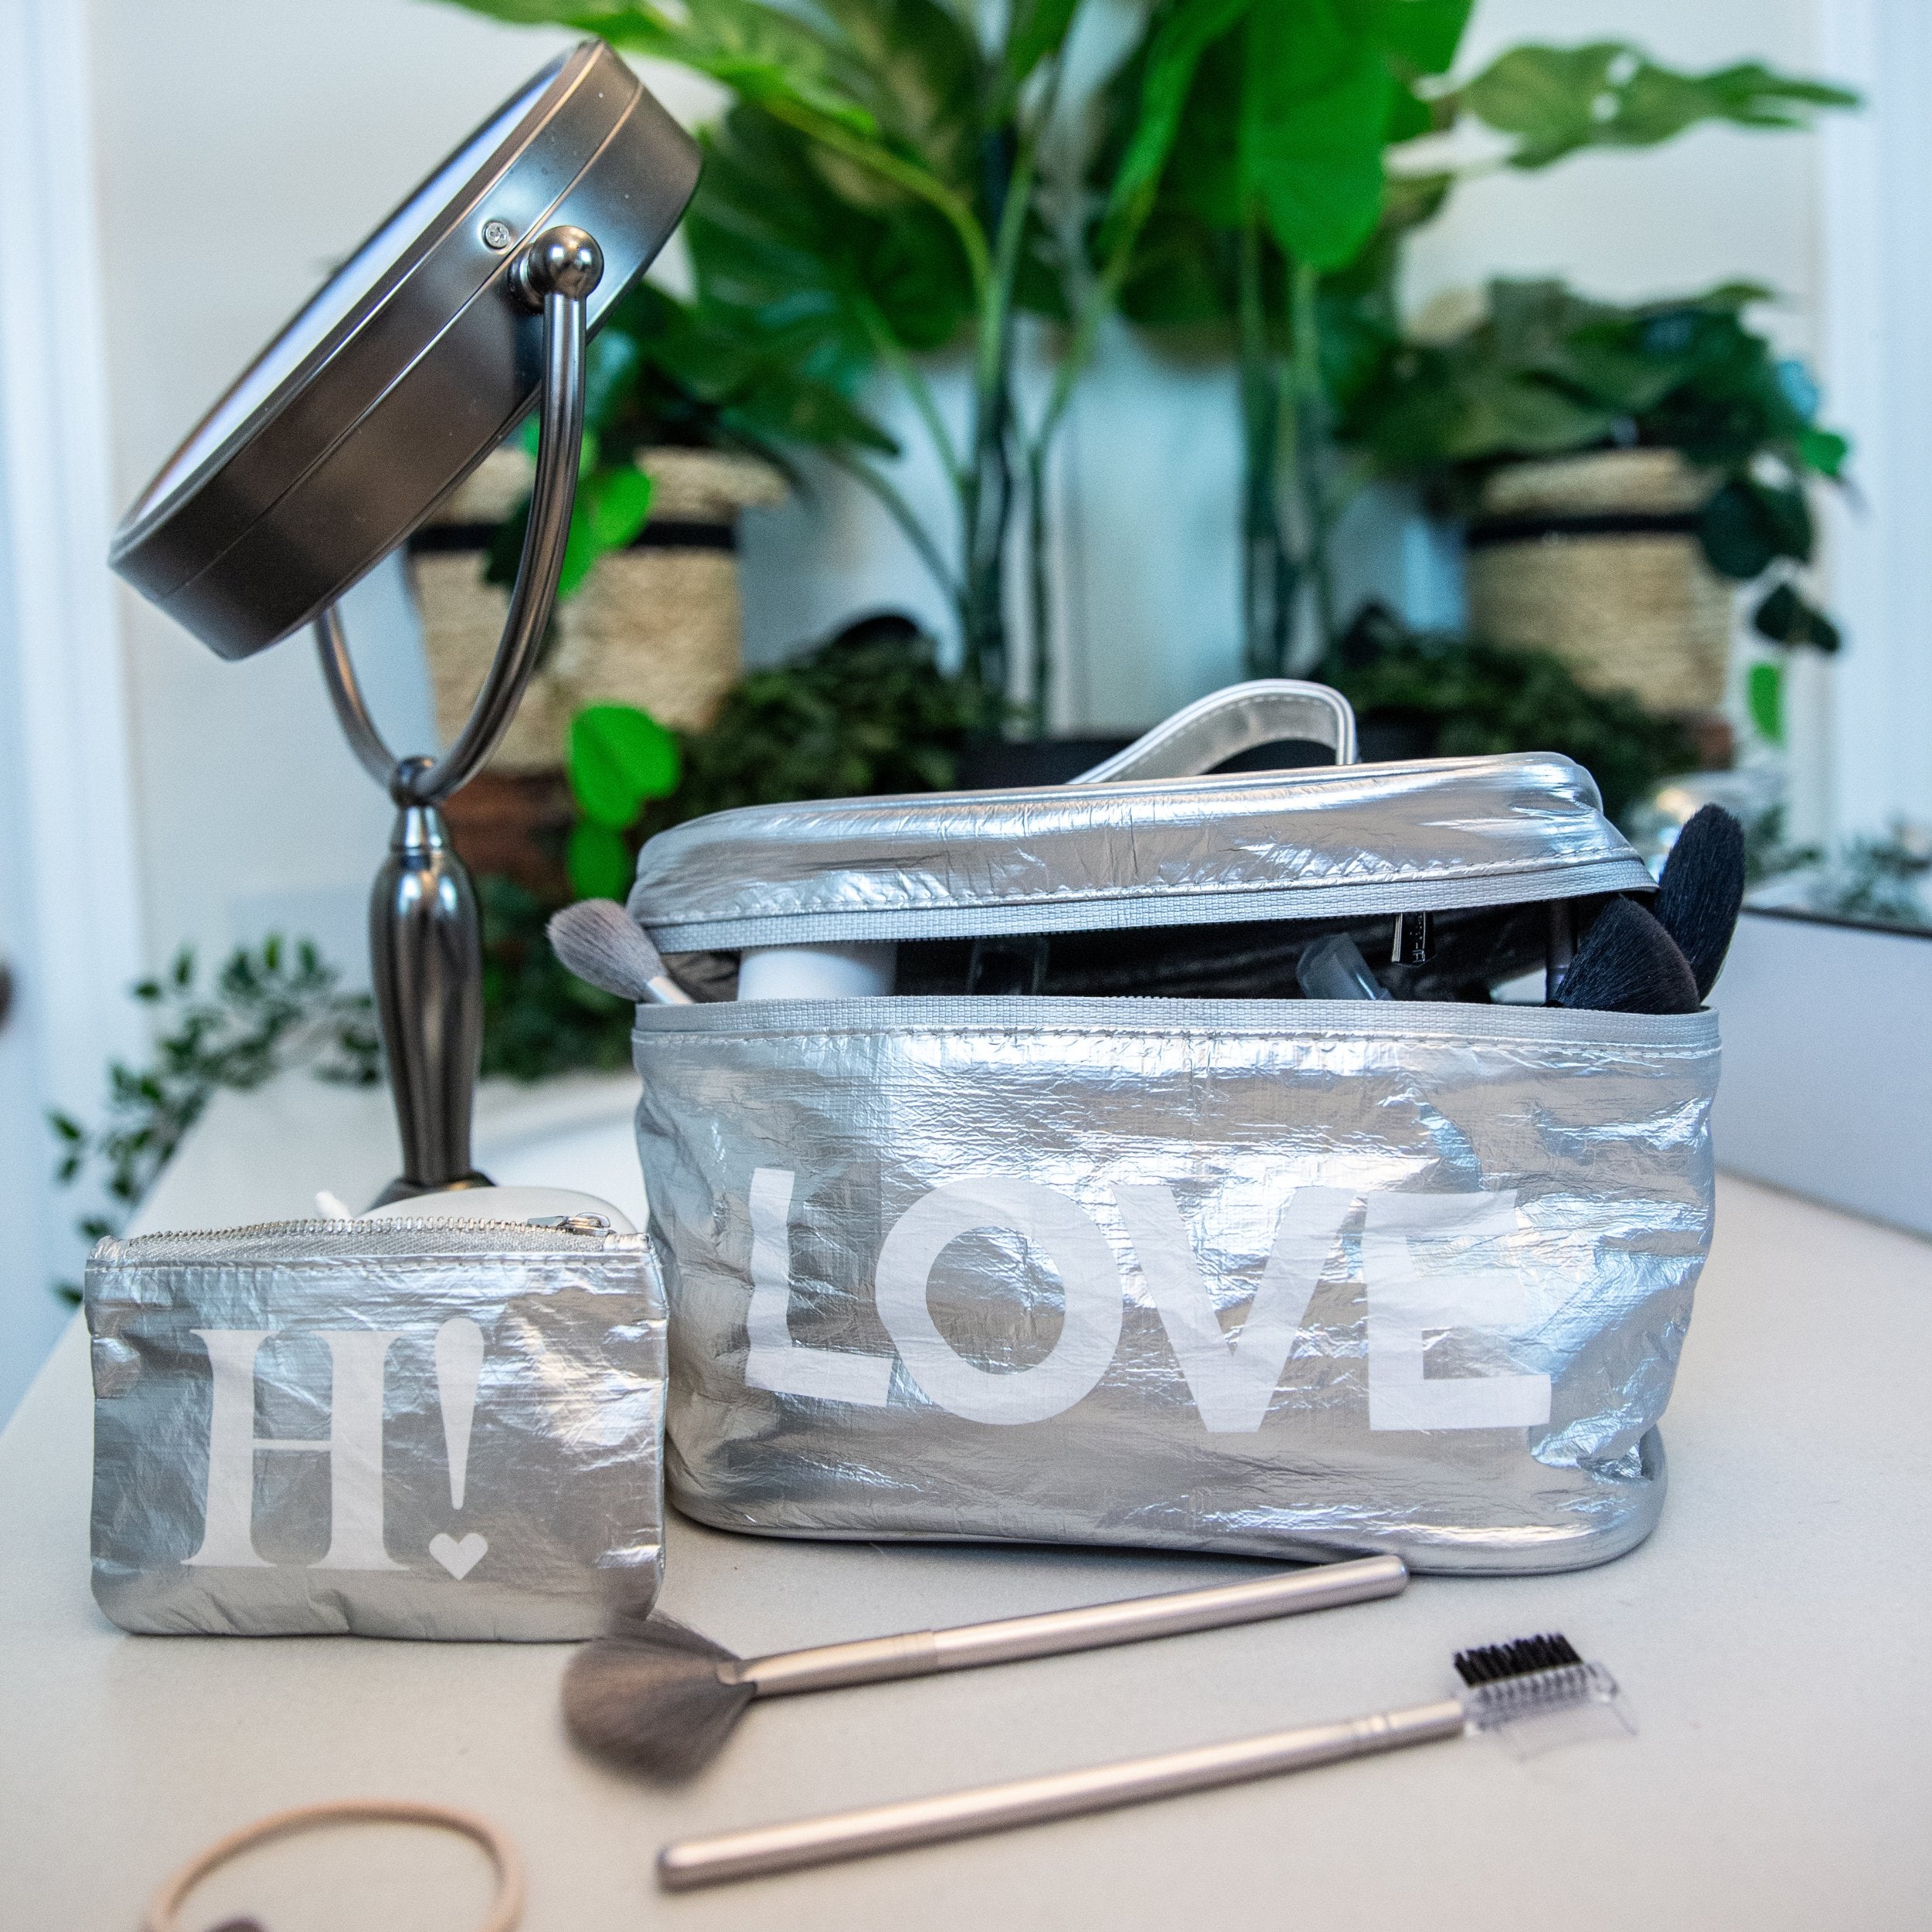 Organize your Everyday Chaos with Hi Love